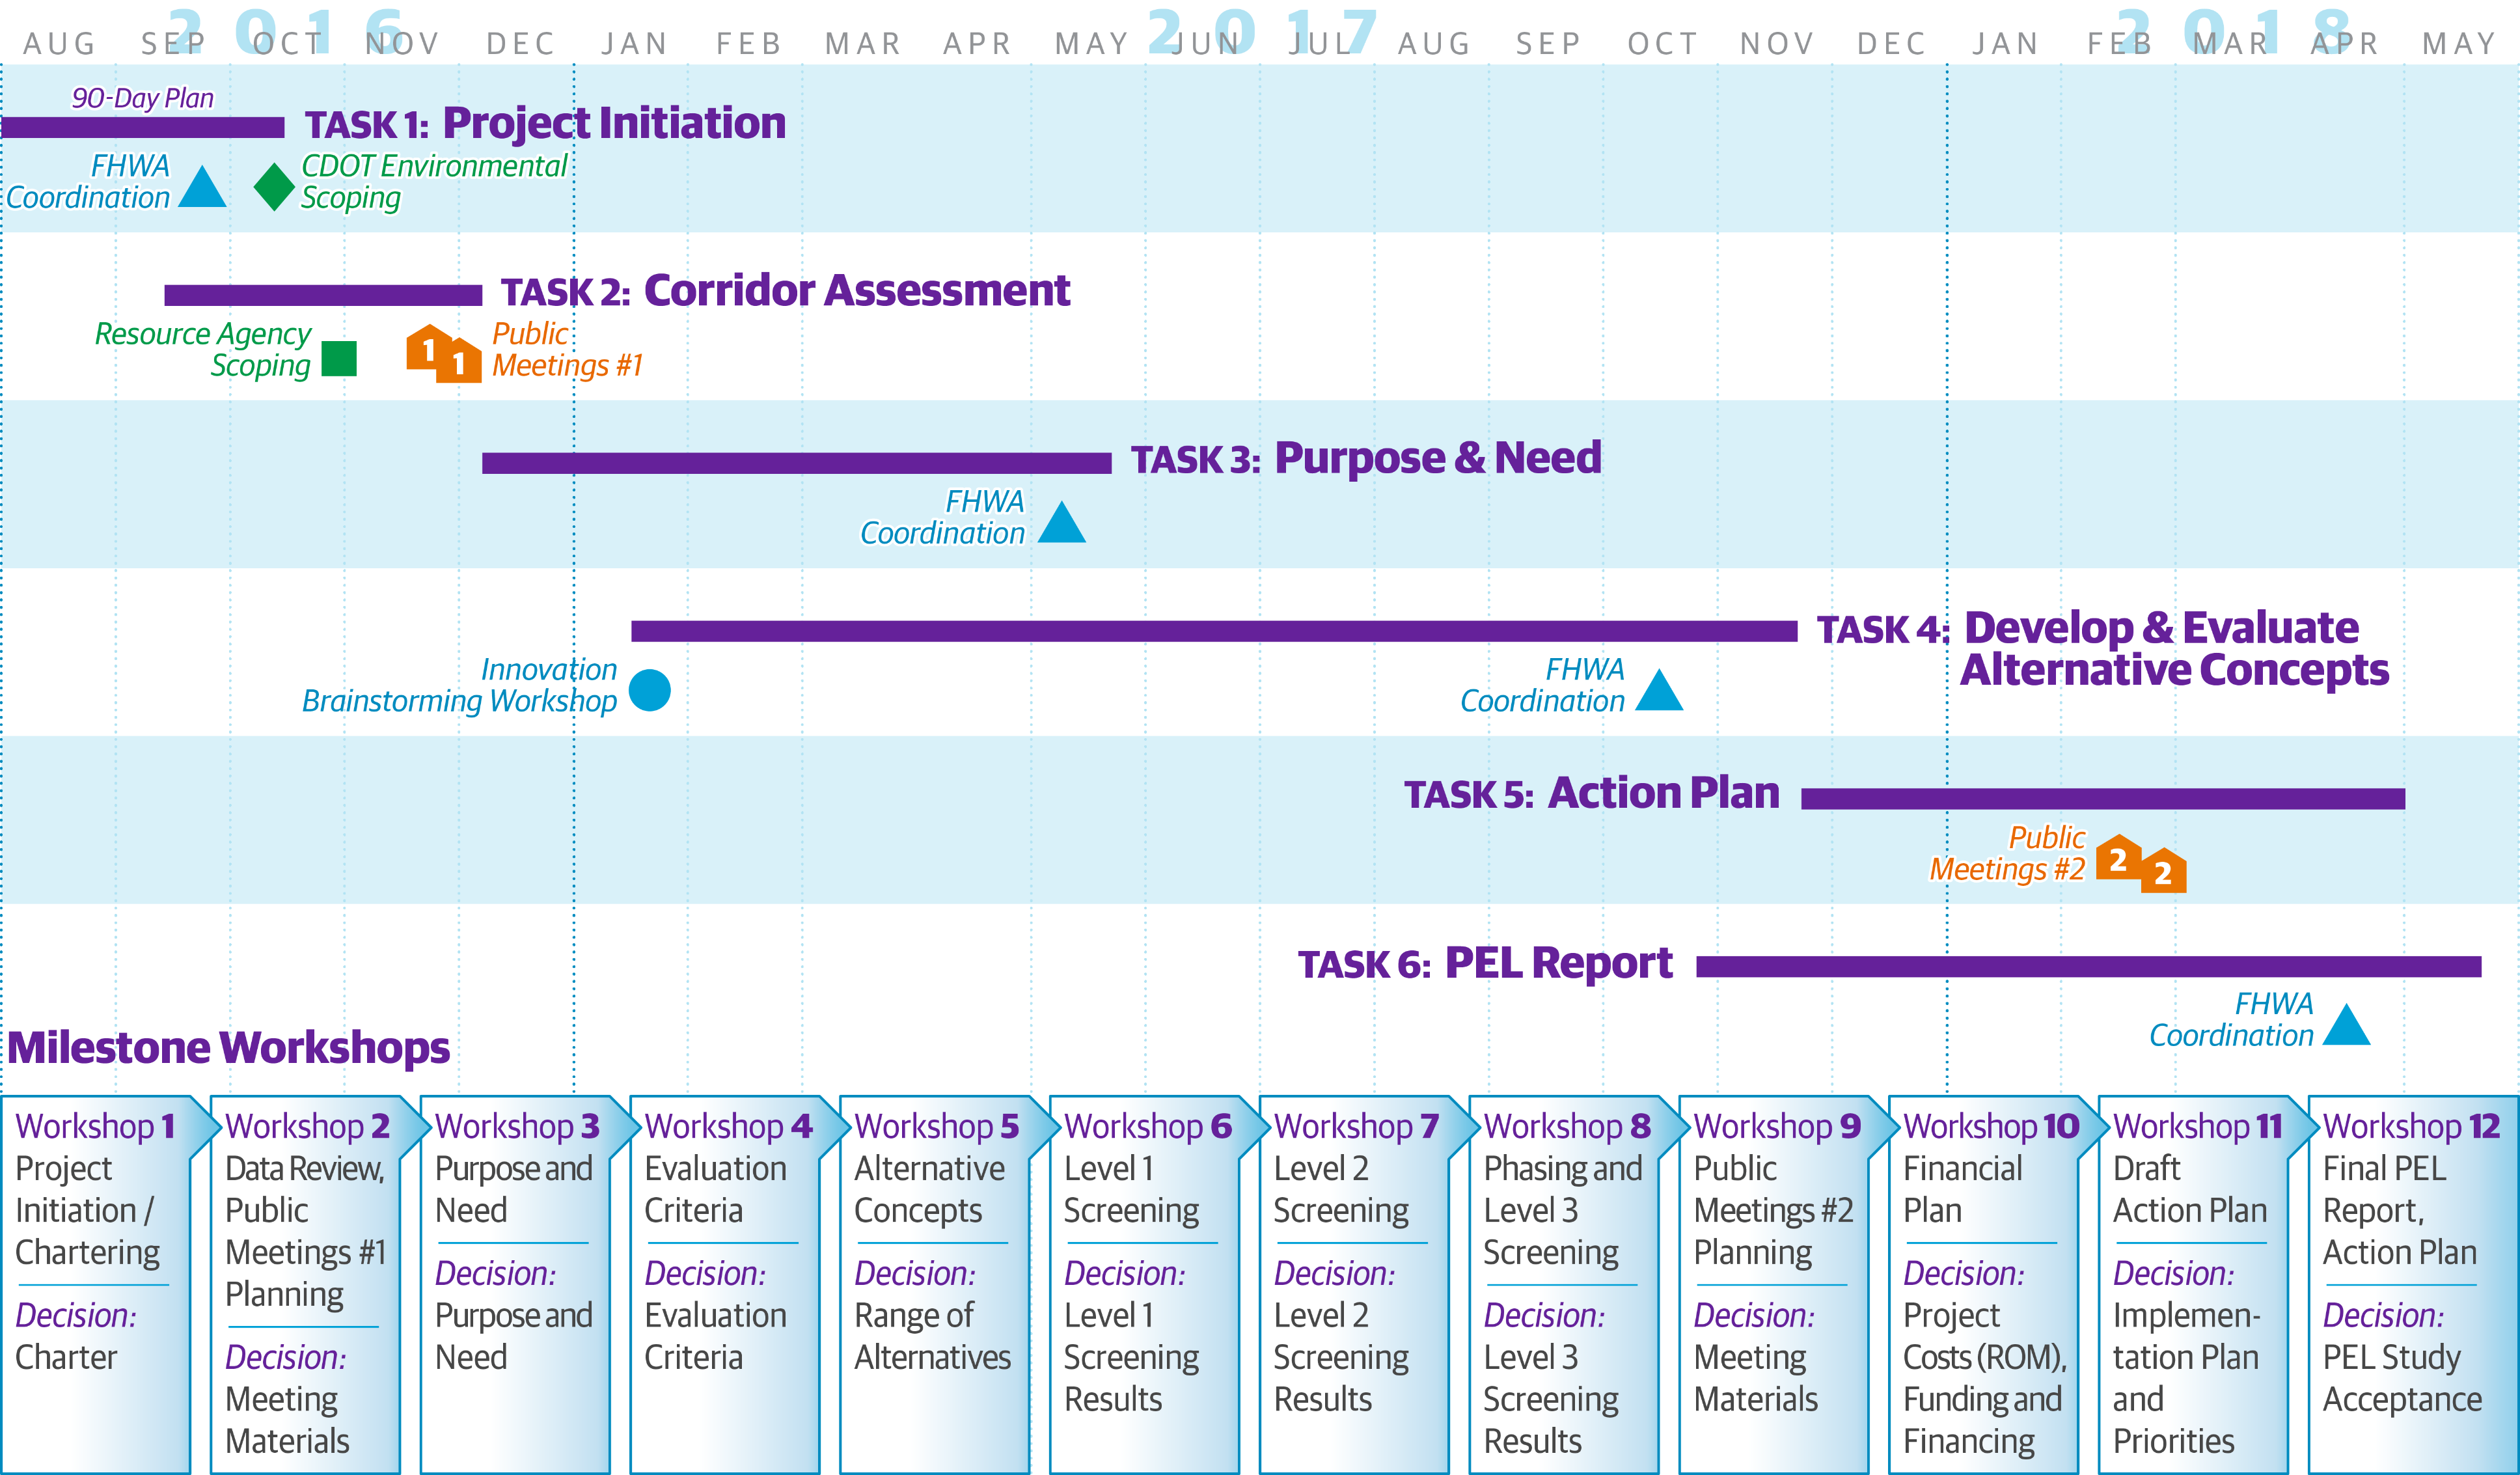 Project Schedule.png detail image